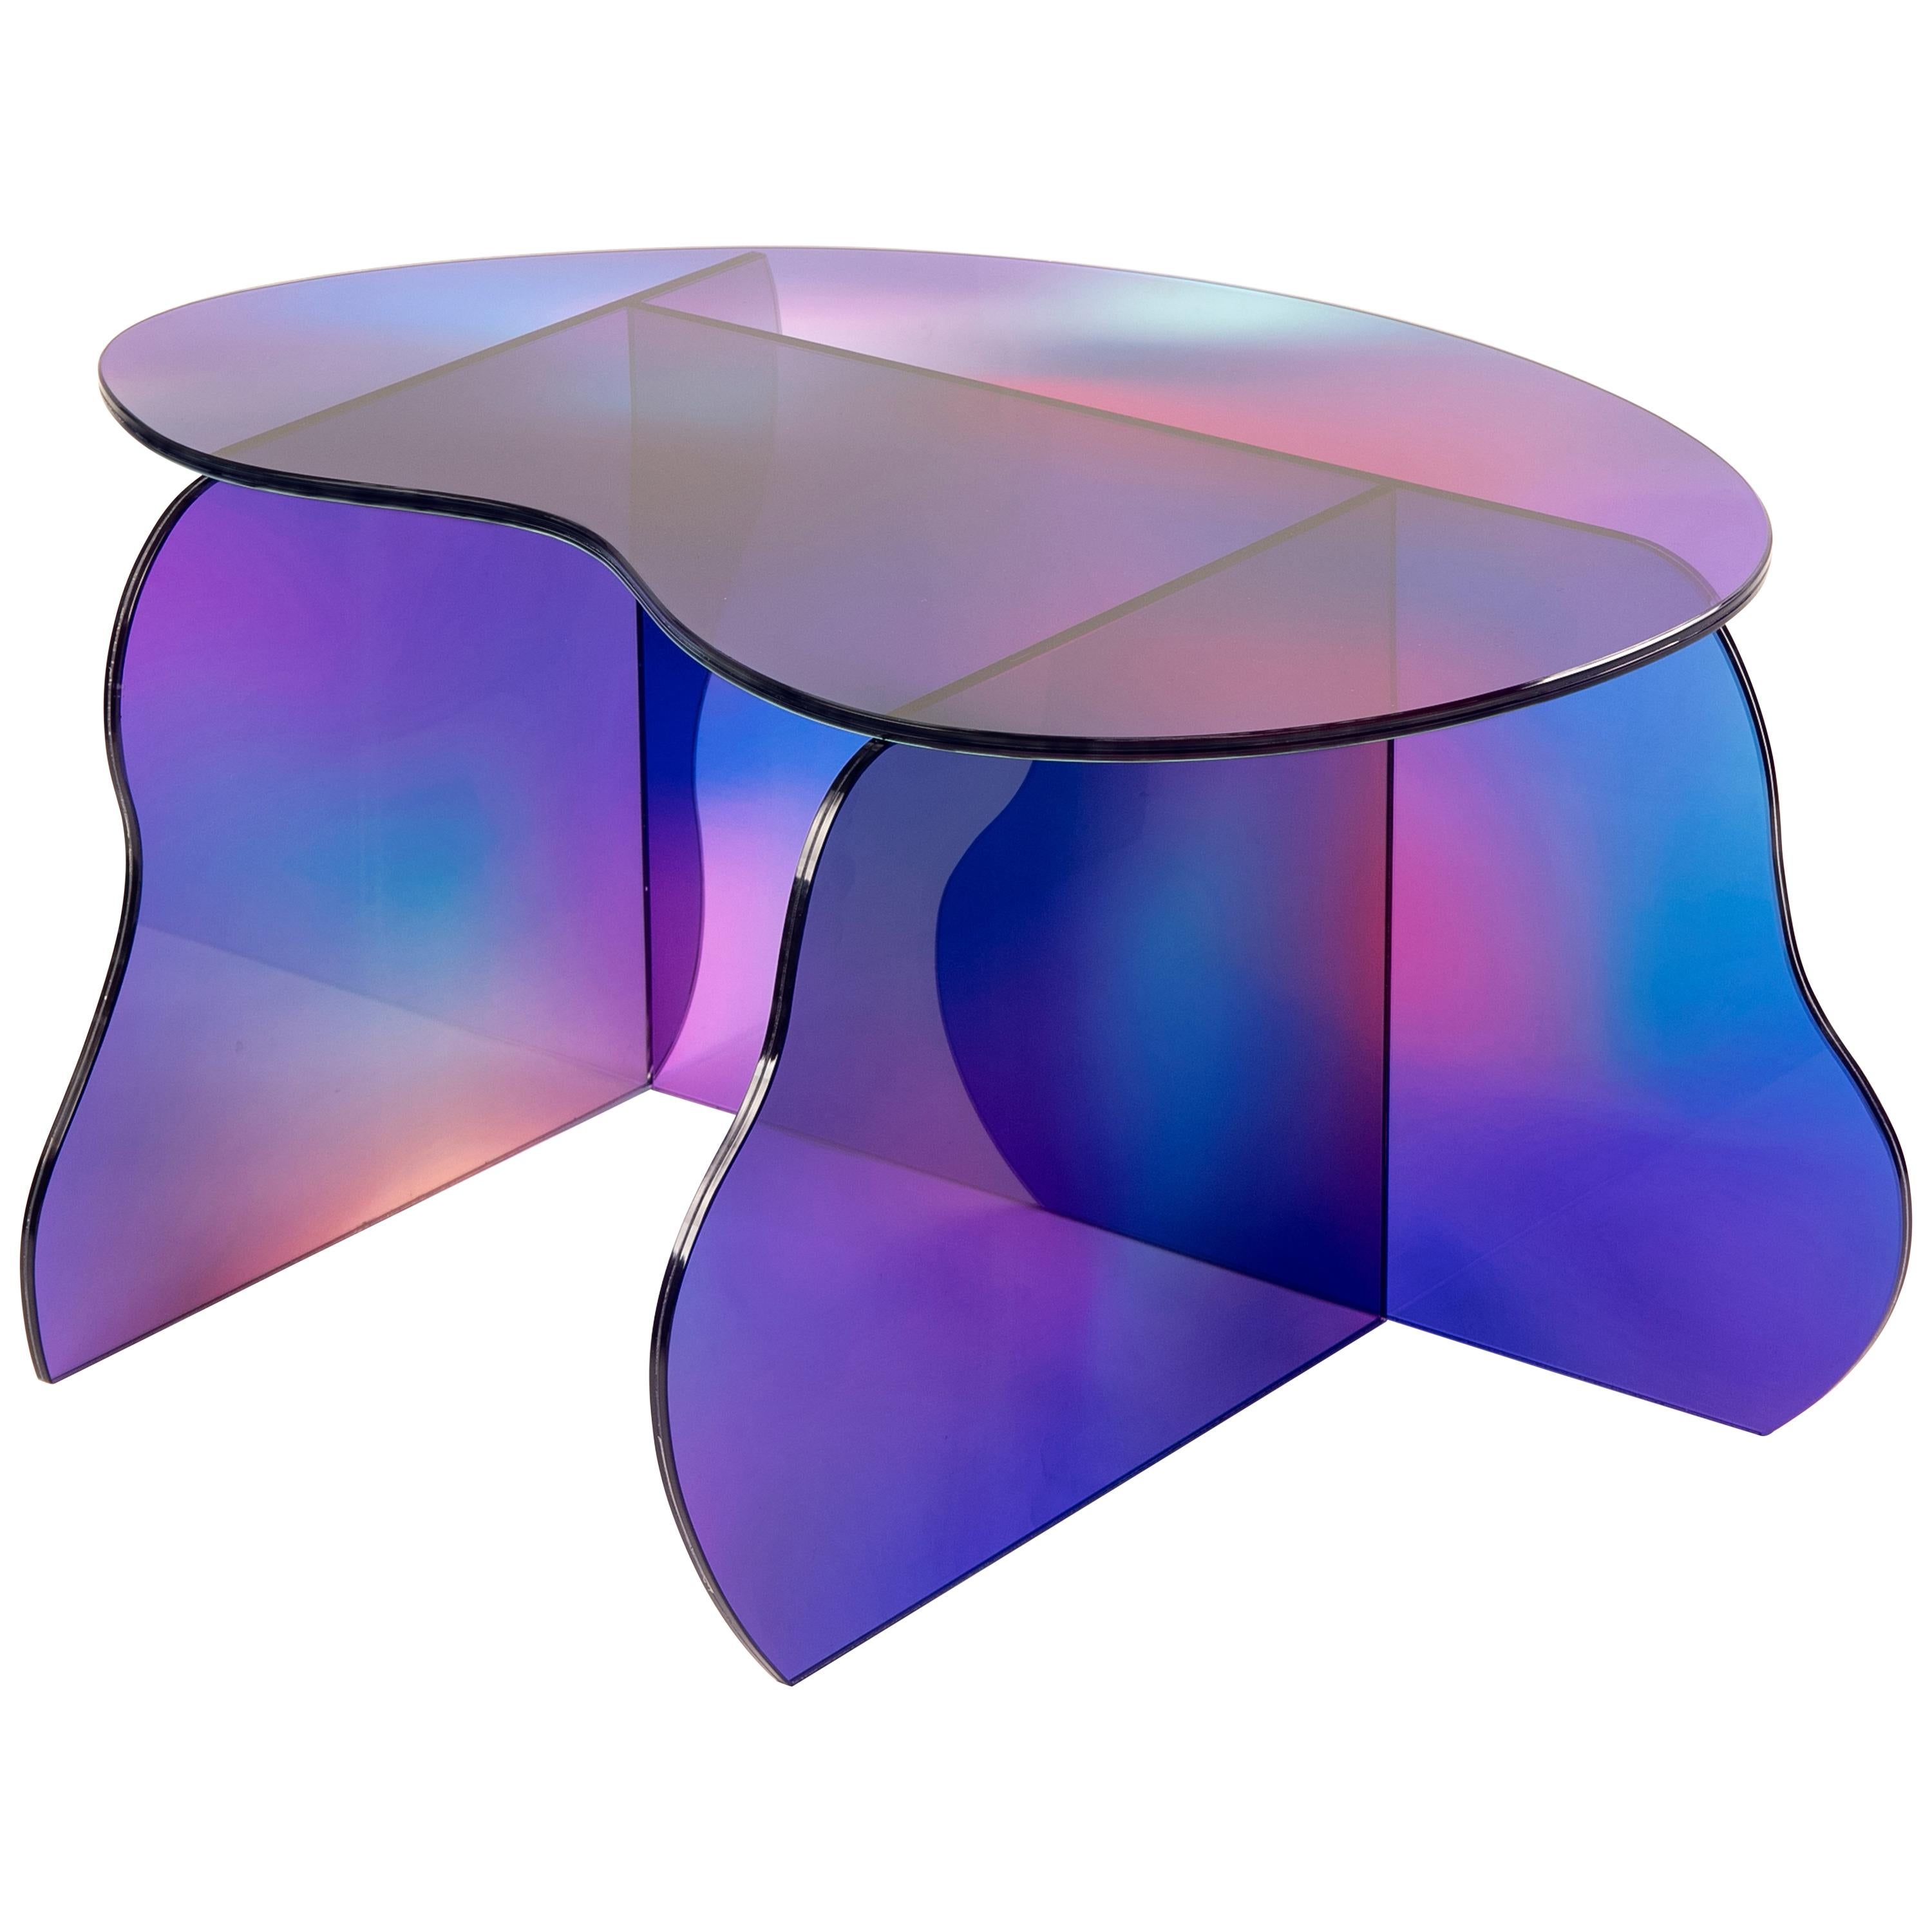 Aurora Dichroic Glass Table Sculpted by Studio-Chacha For Sale